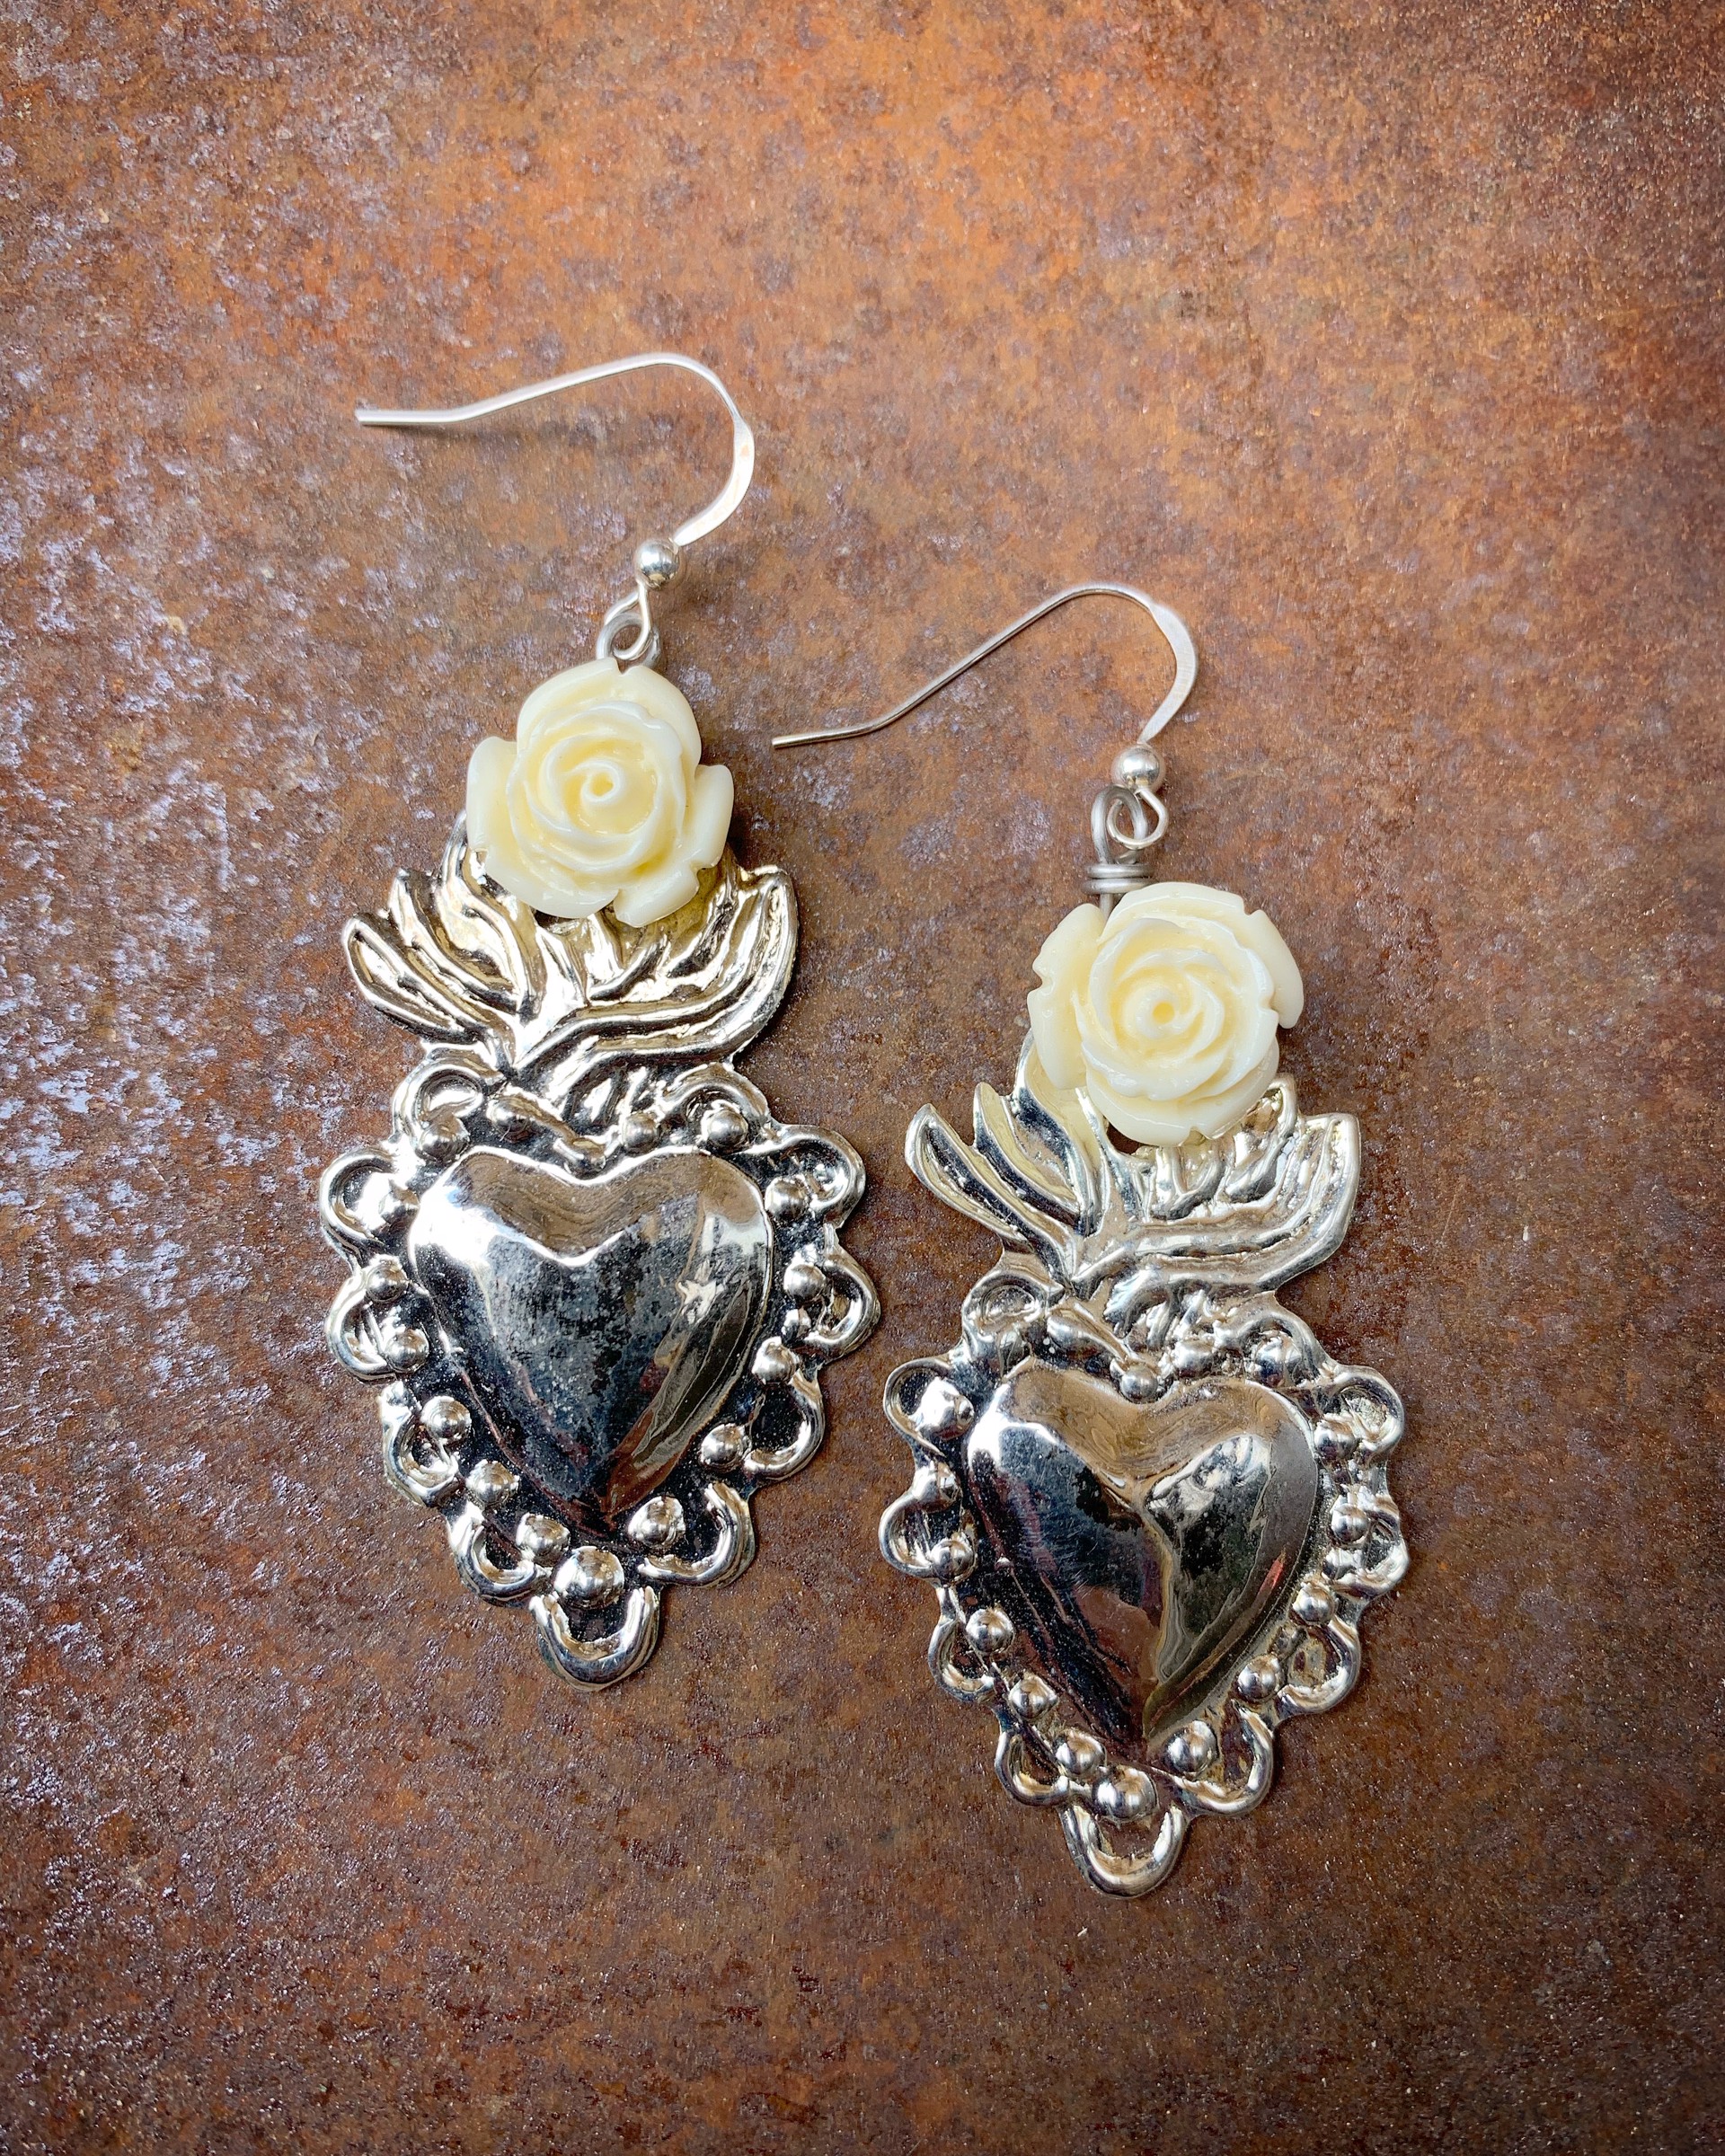 k655 Sacred Hearts white Roses by Kelly Ormsby